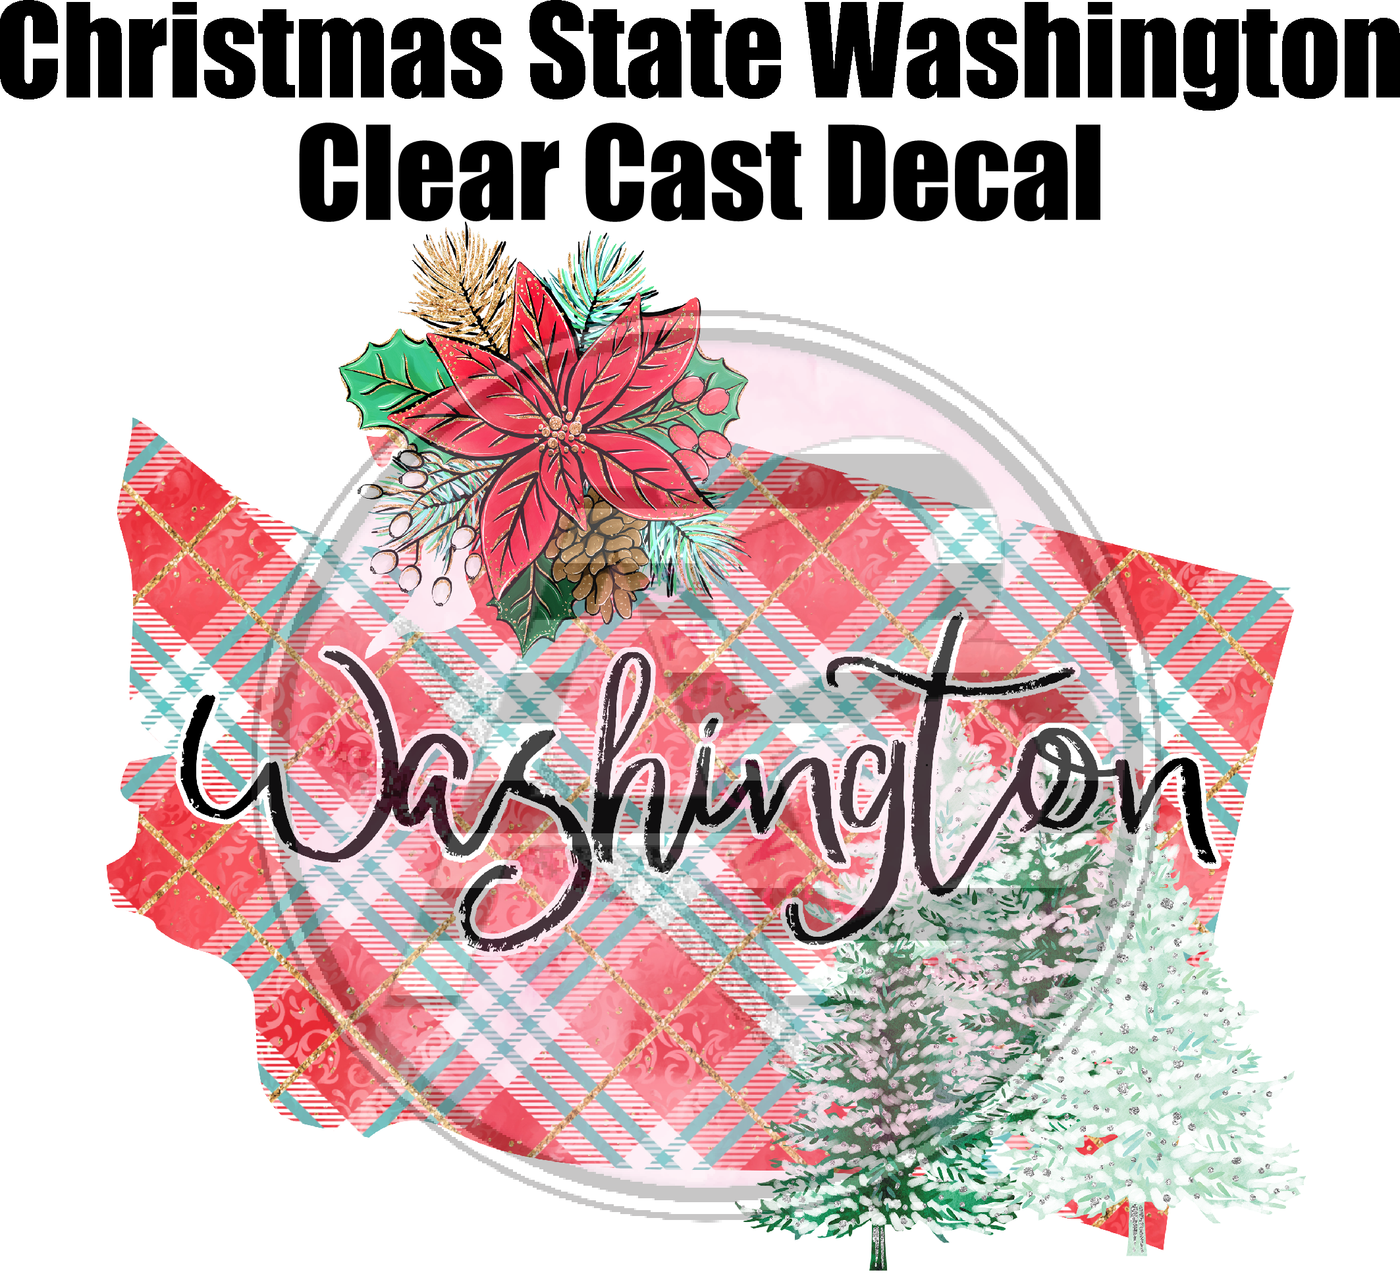 Christmas State Washington - Clear Cast Decal